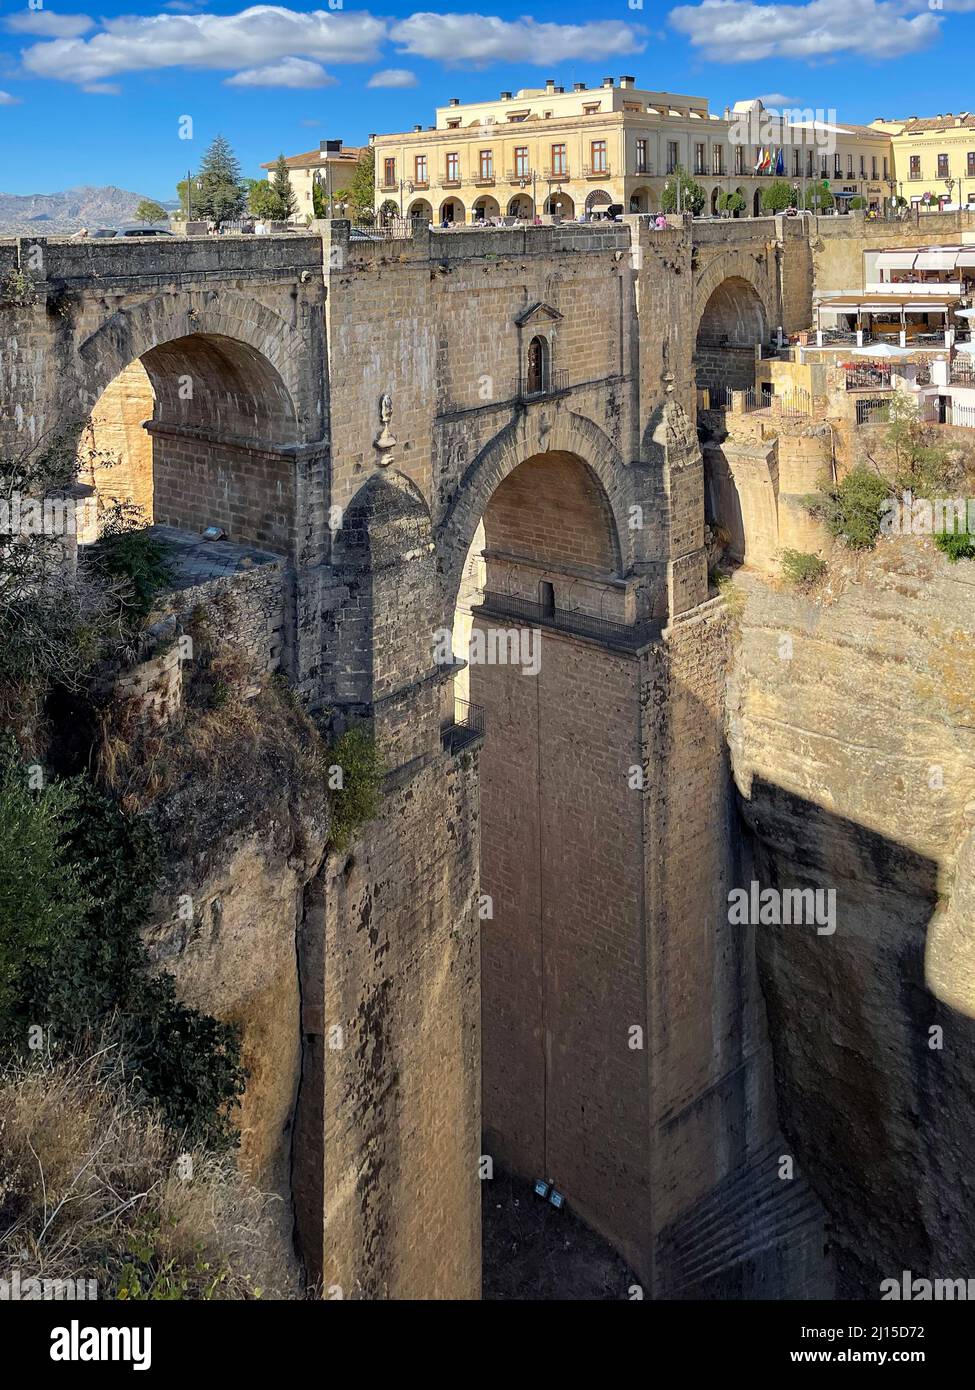 City of Ronda, Spain, and view of the New Bridge, or Puente Nuevo in Spanish. Ronda is one of the picturesque and popular White Villages. Stock Photo